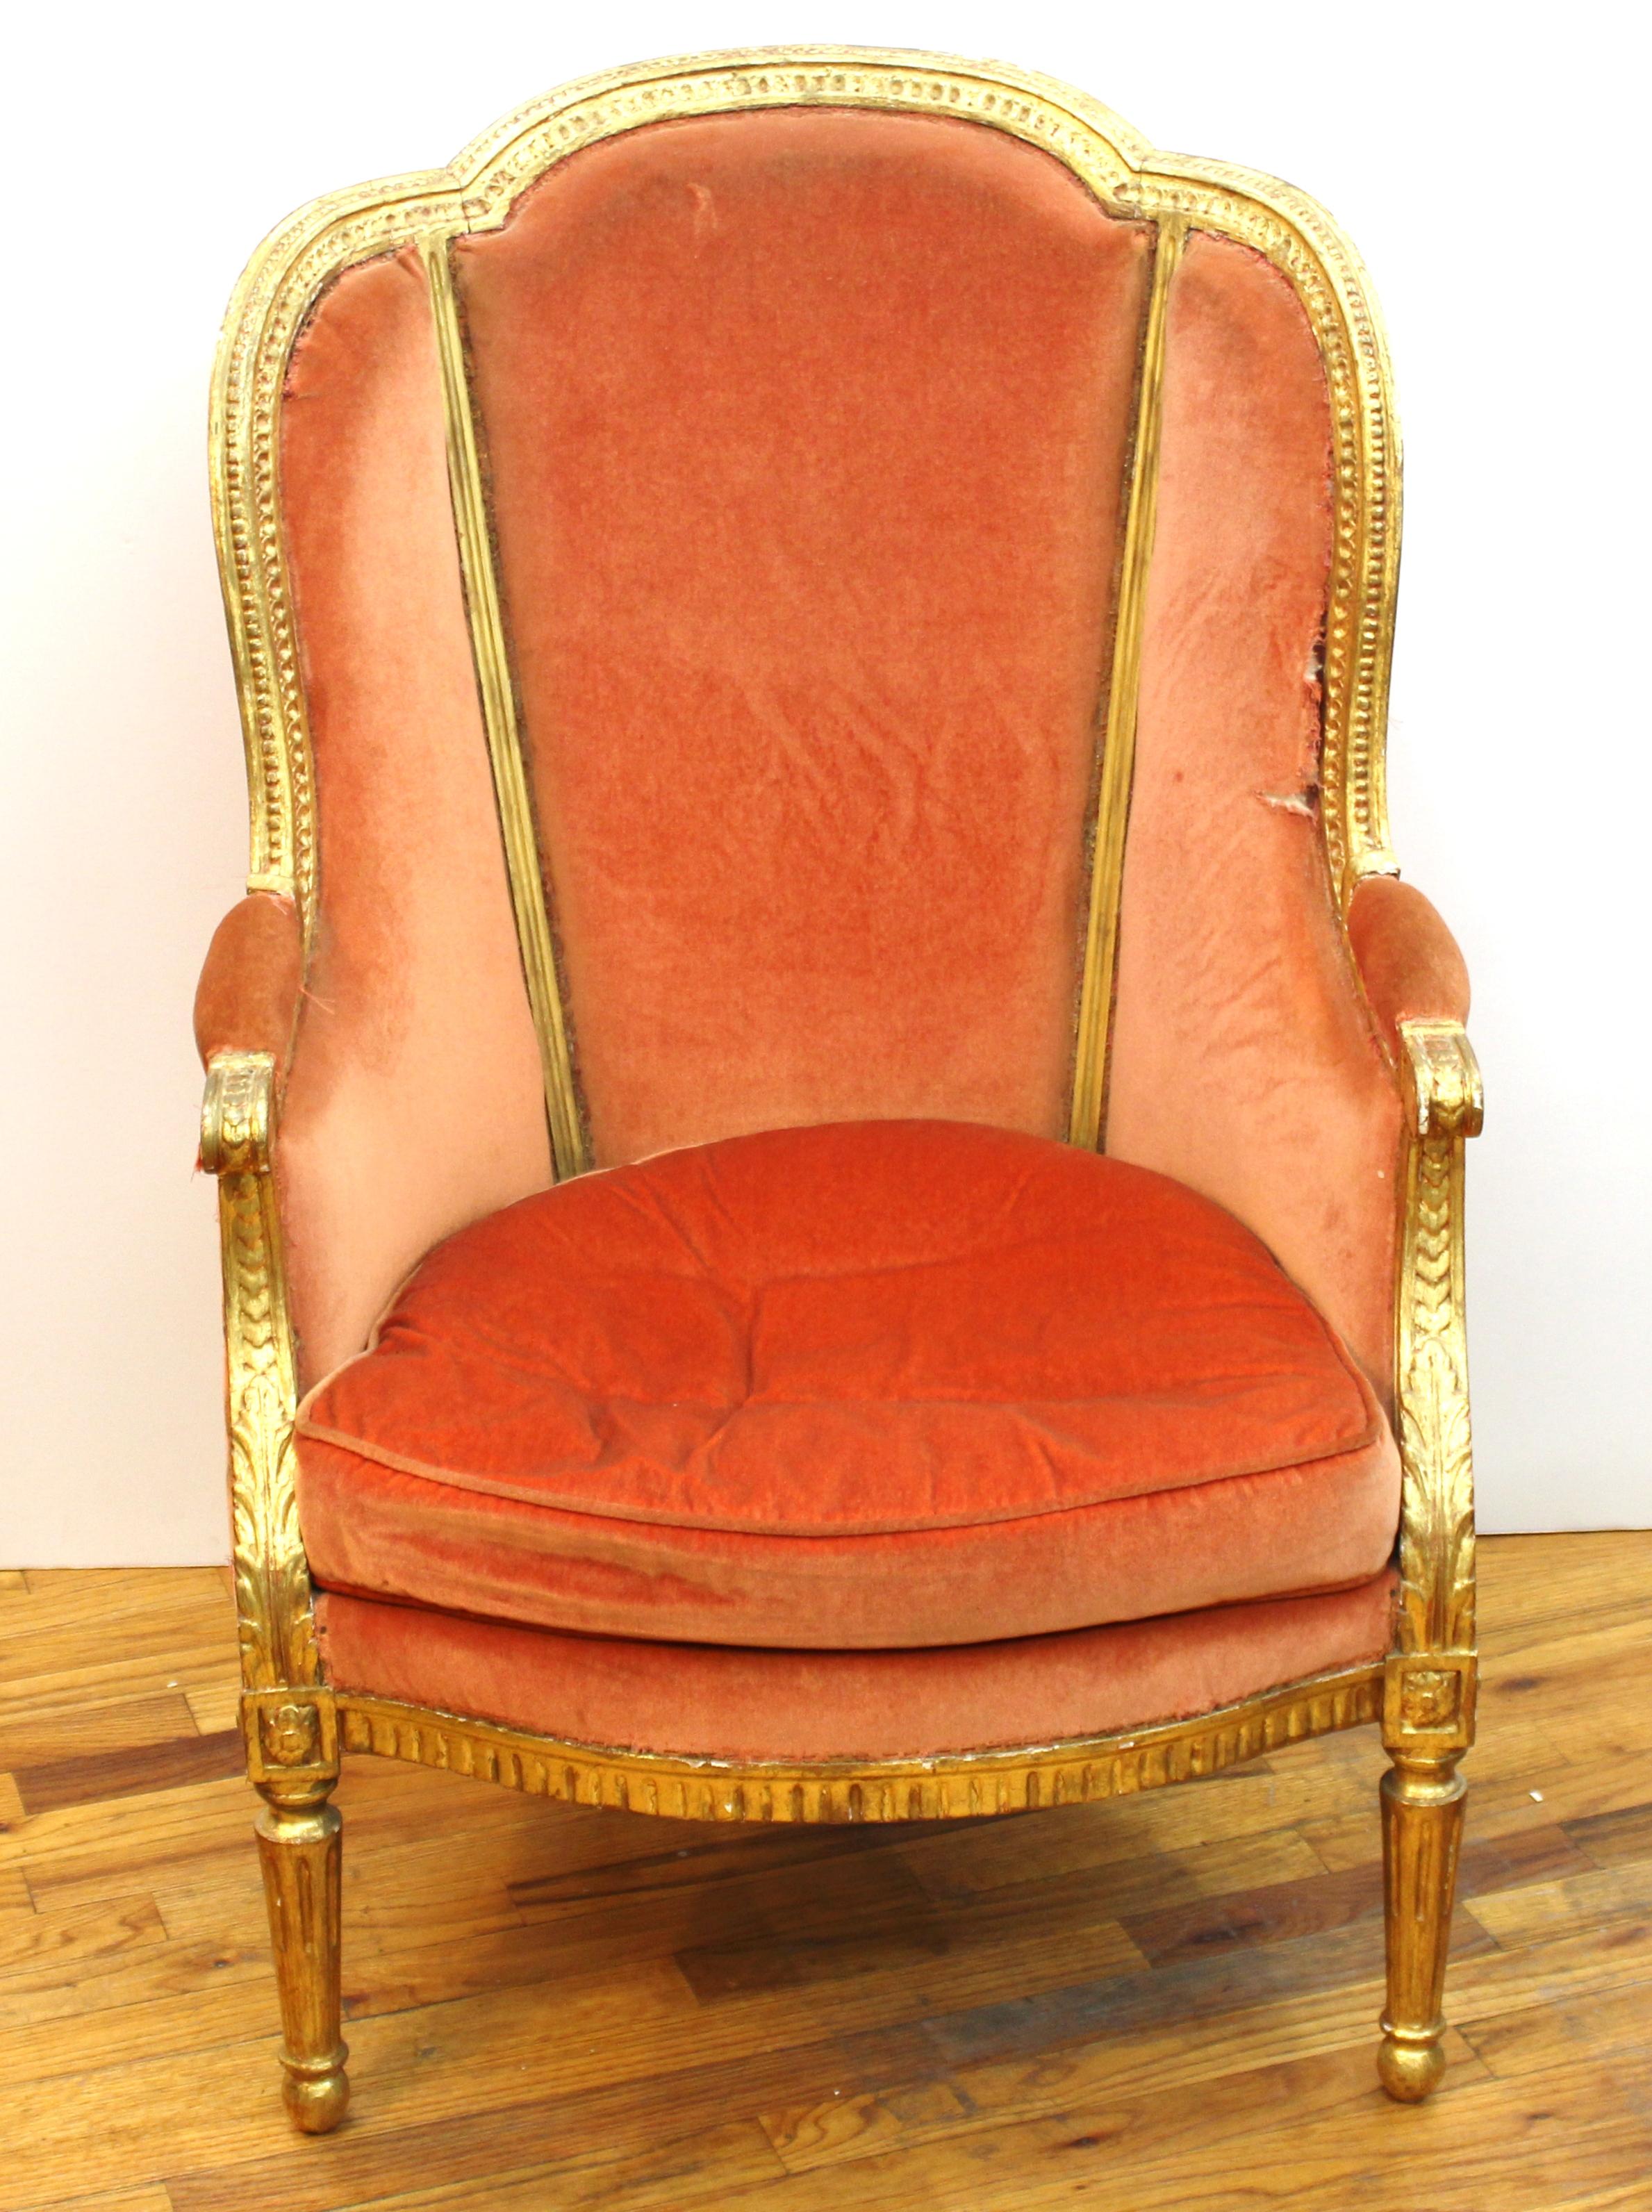 Upholstery French Louis XVI Style Chaise Longue